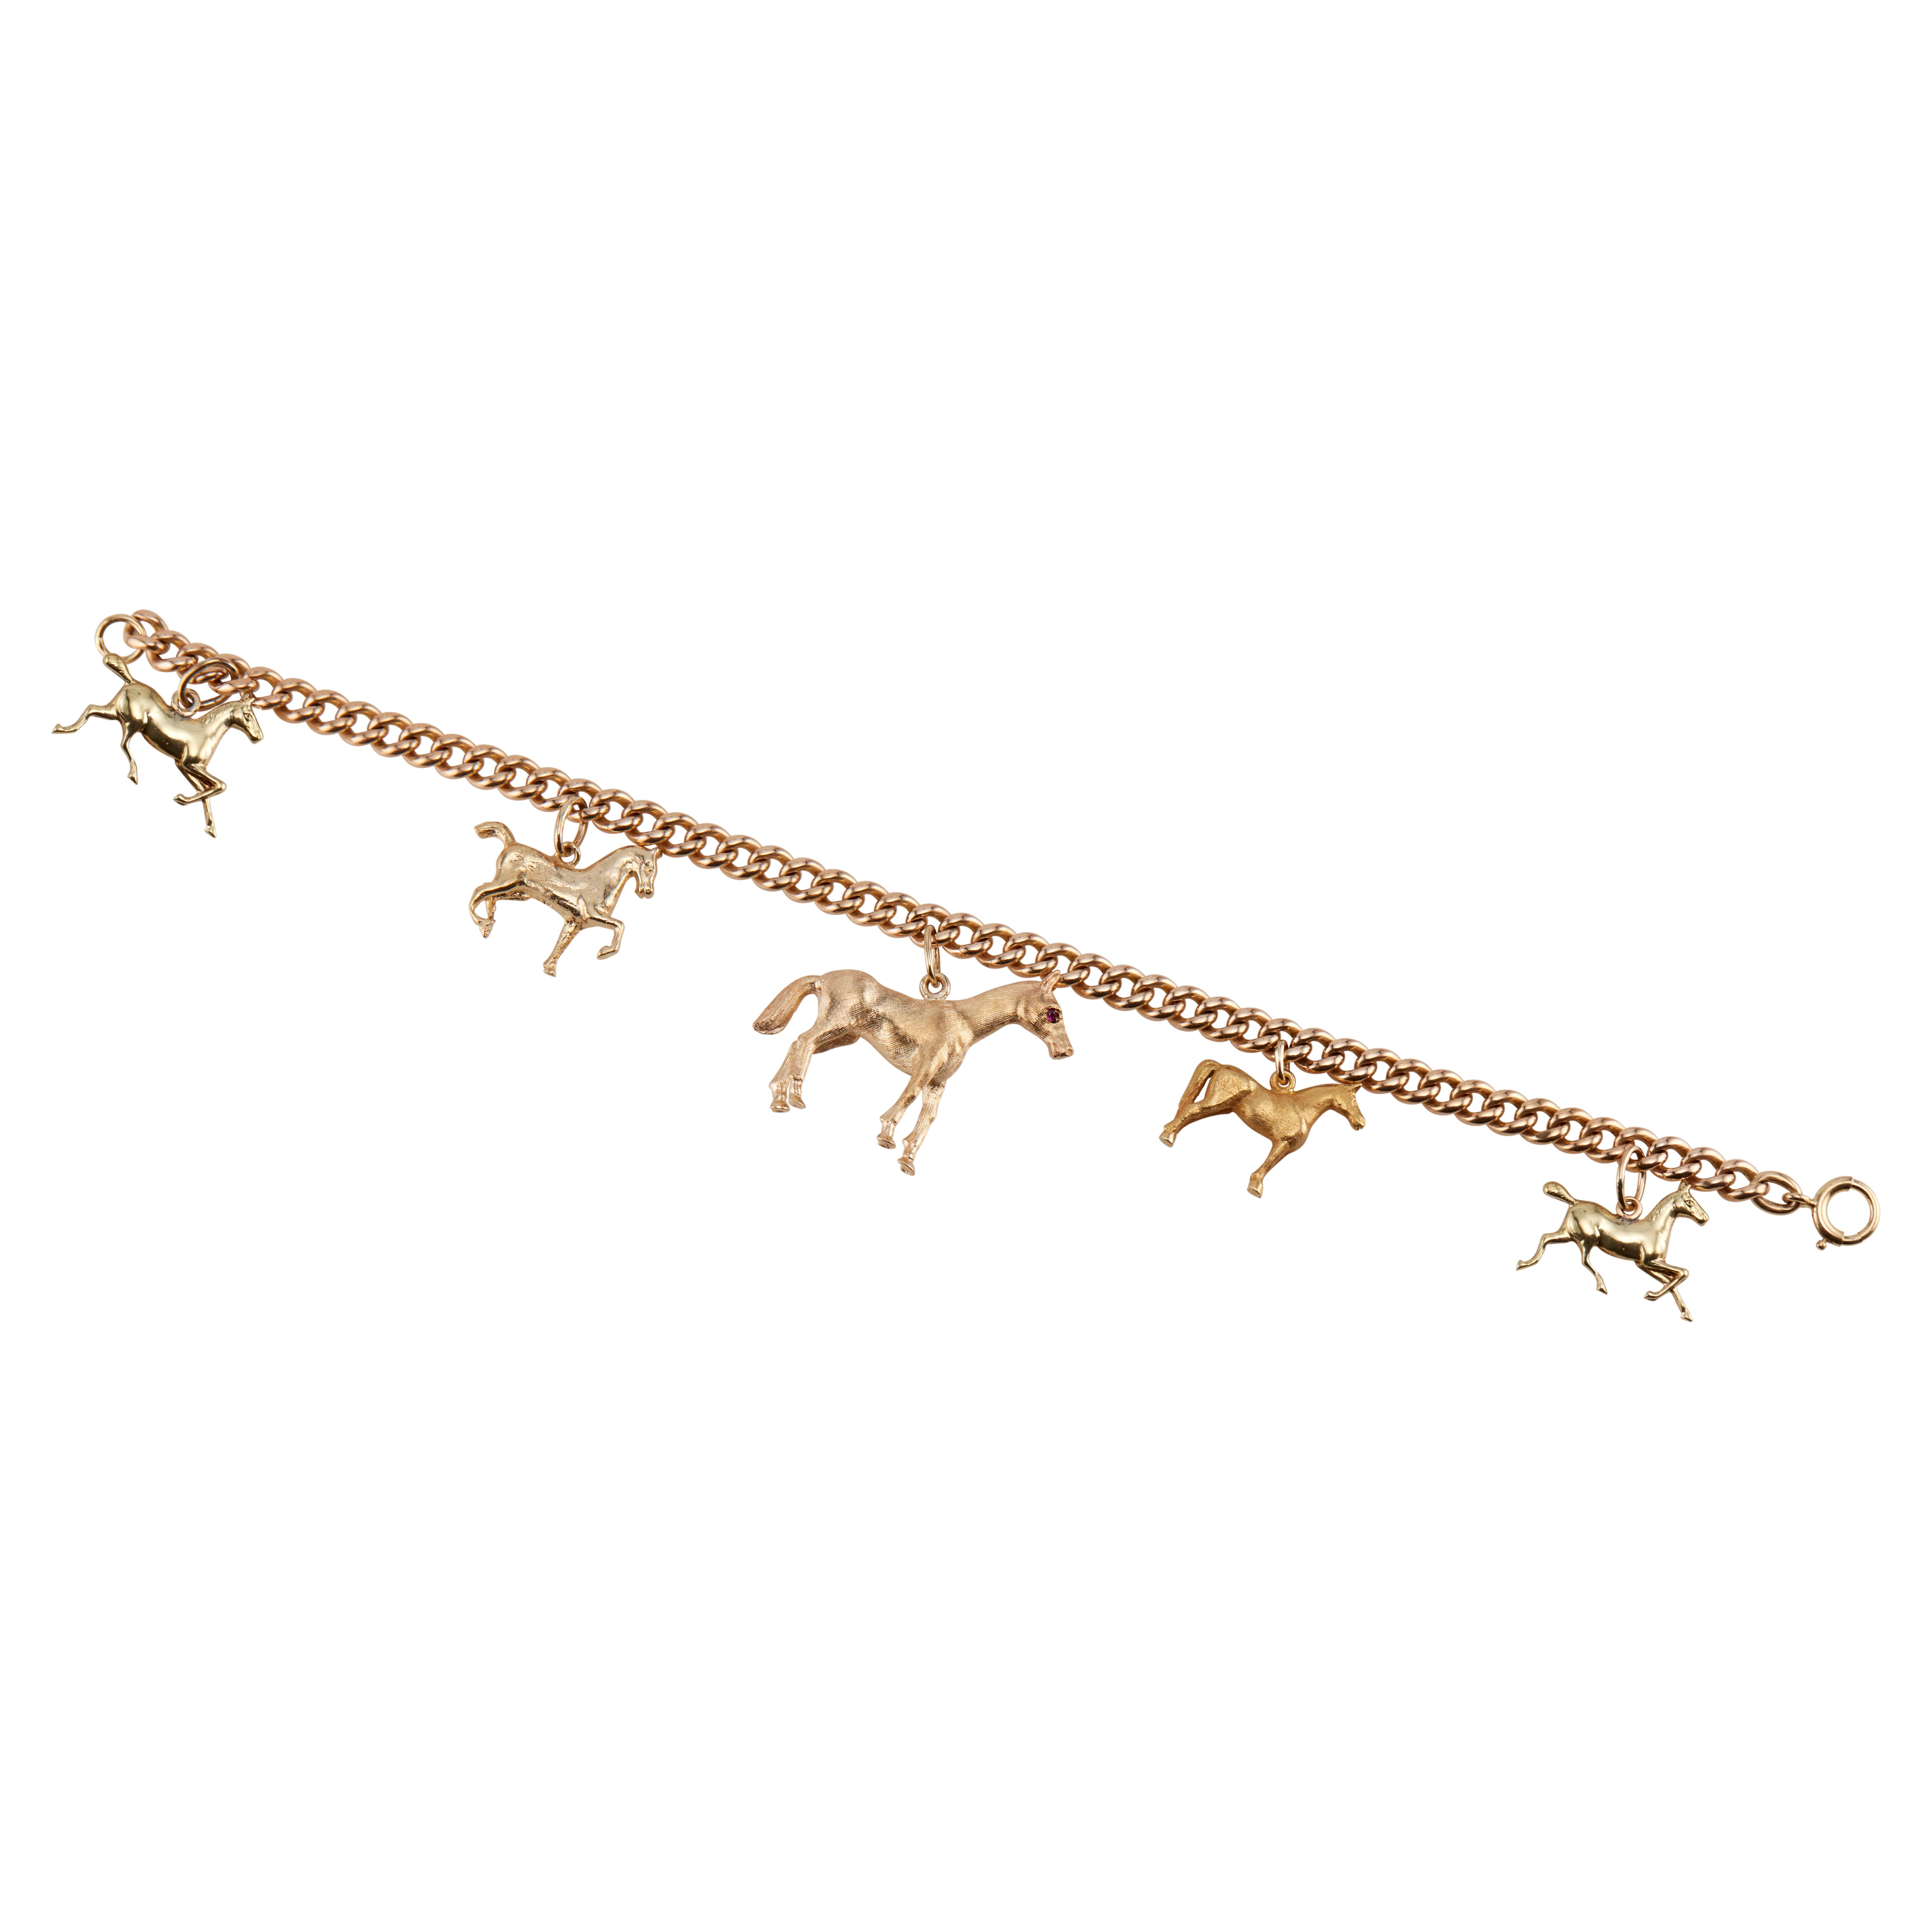 1960's Five charms, two and three dimensional solid 14k gold horse charms on a solid 14k rose gold bracelet. 7 inches in length. 

14k yellow gold 
14k rose gold 
Stamped: 14k
29.4 grams
Depth or thickness: 6.6m - 1.6mm
Bracelet: 7 Inches
Width: